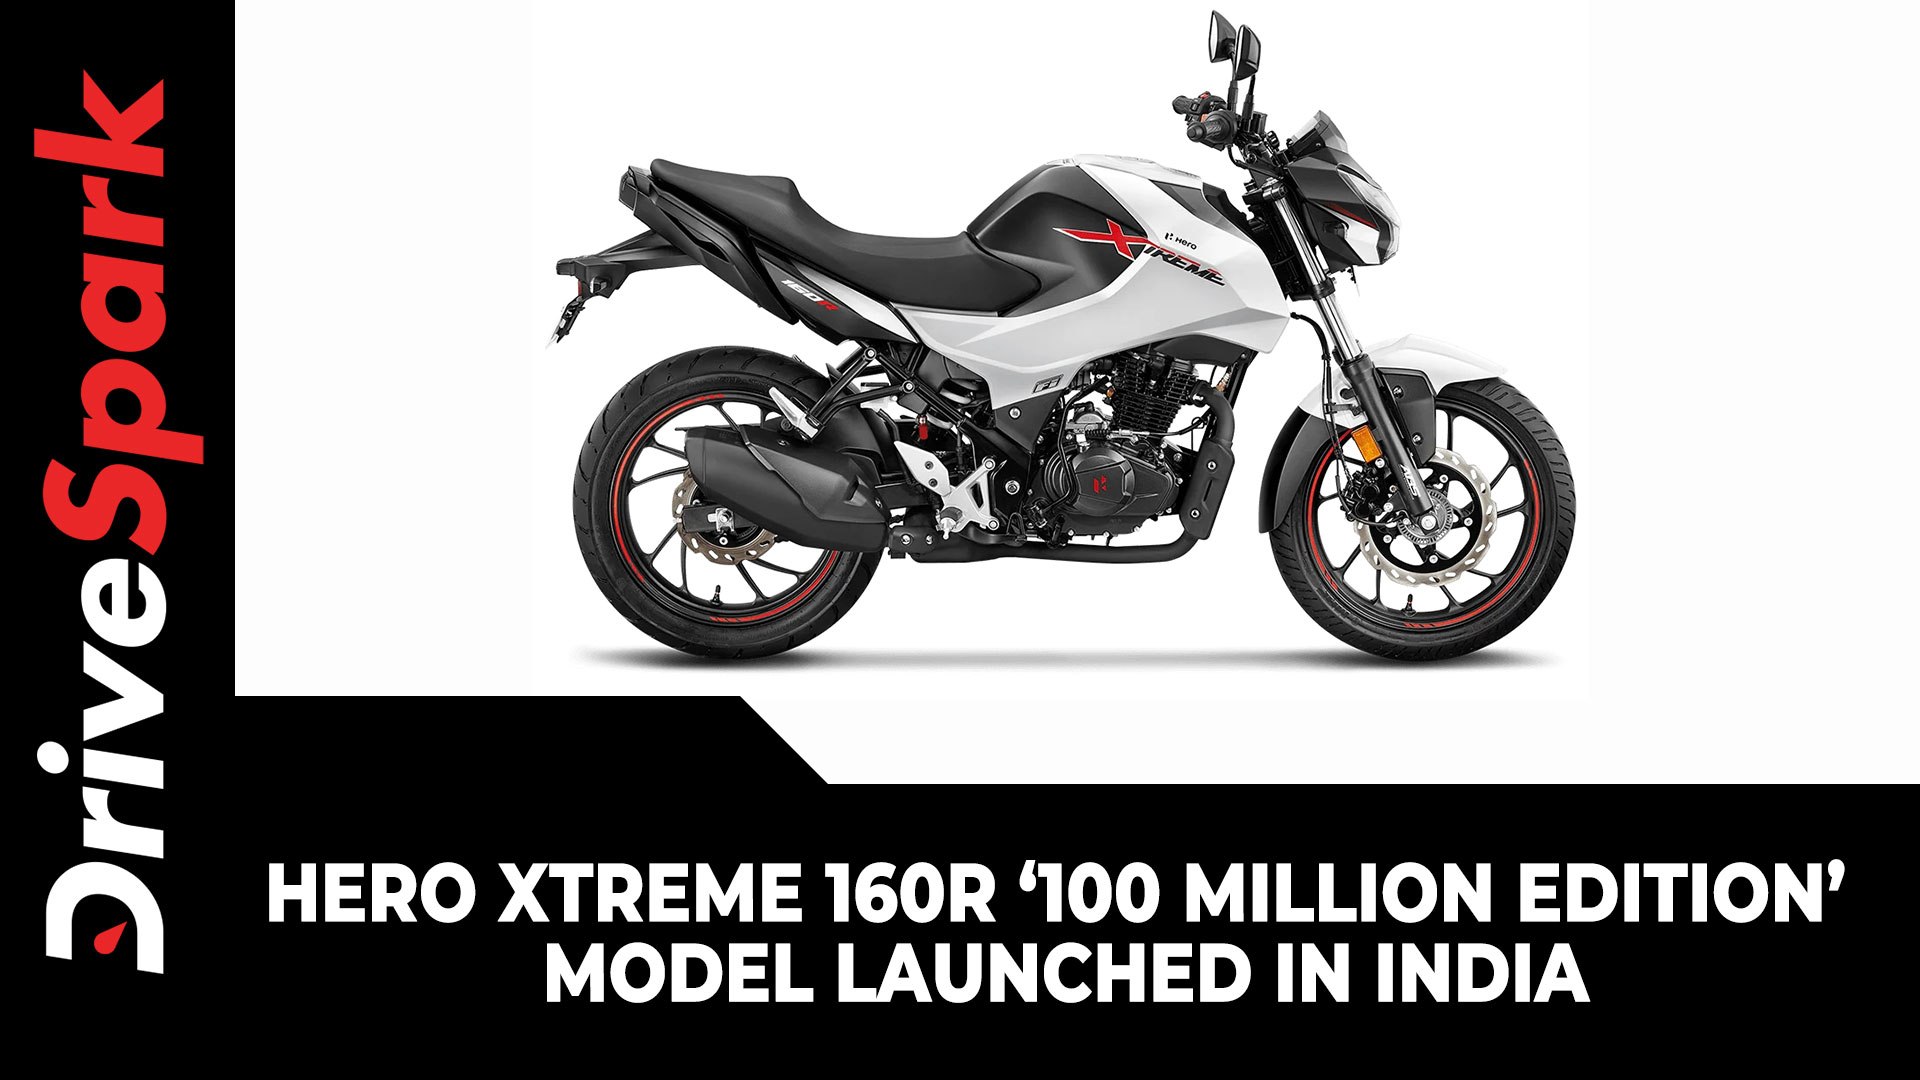 Hero Xtreme 160r 100 Million Edition Model Launched In India Price Features Other Details Video Dailymotion